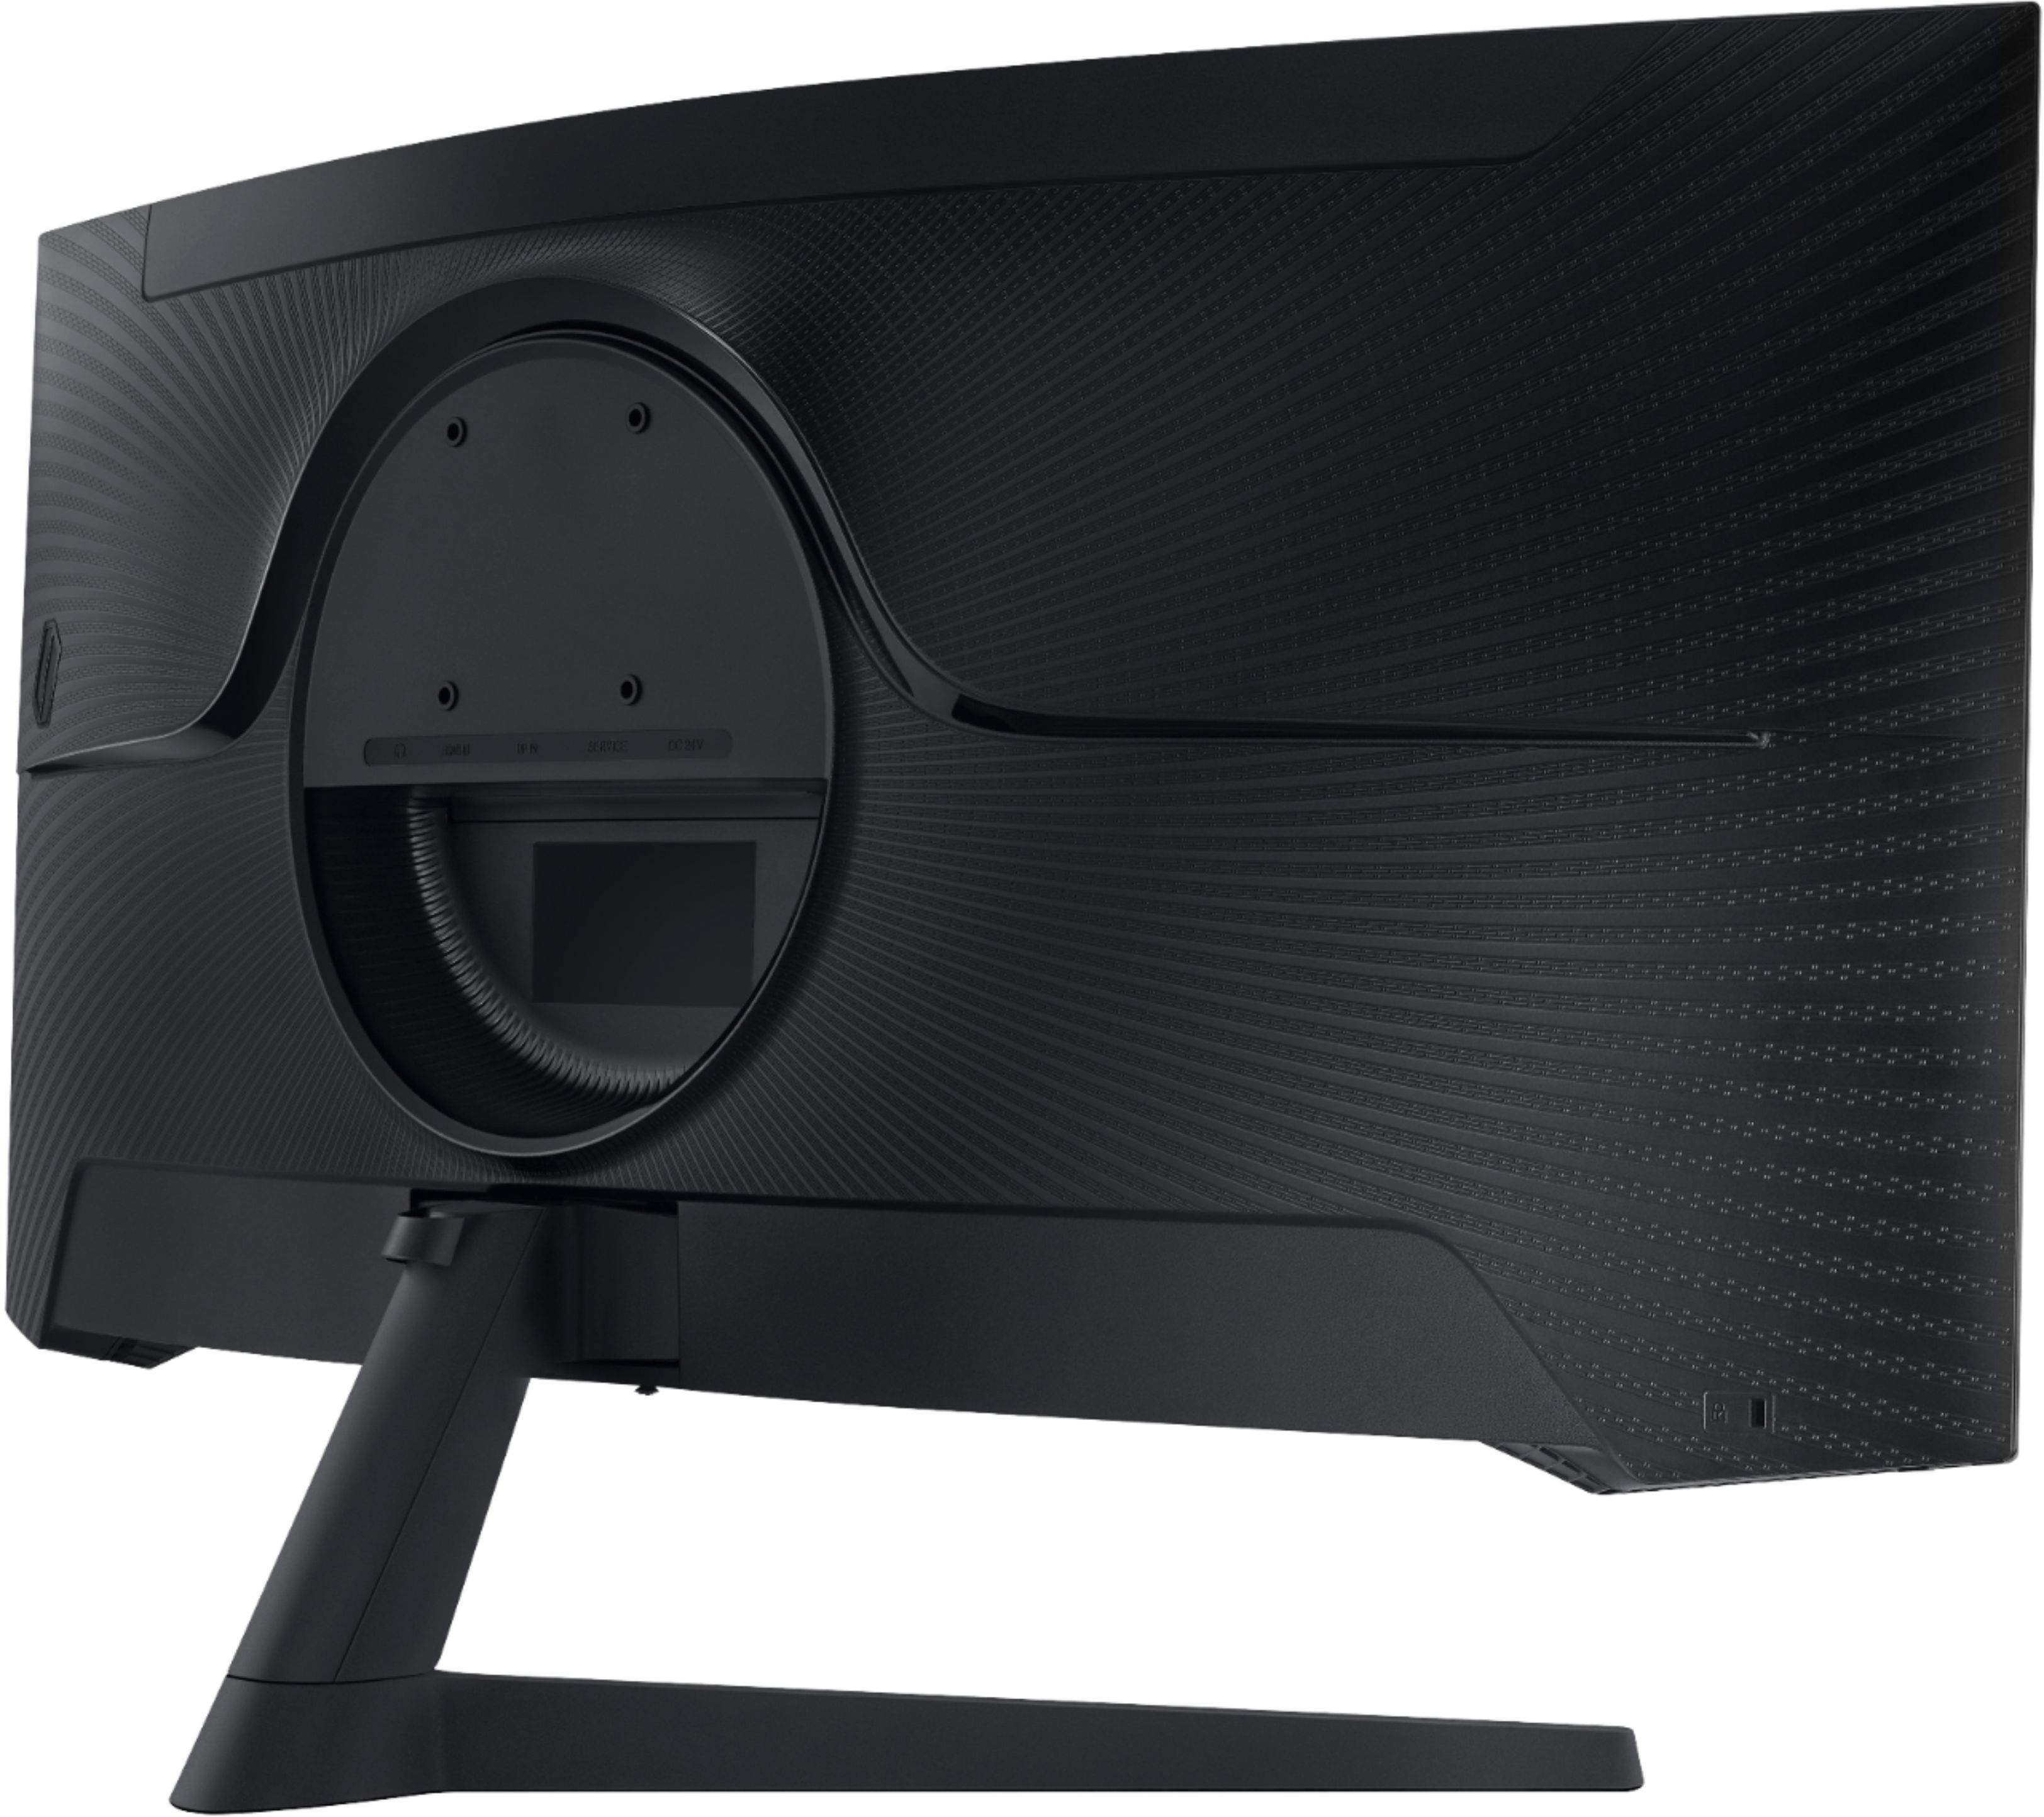 Review: Samsung Odyssey G5 C34G55TWWN 34 Curved Monitor - Cybersecurity  Careers Blog